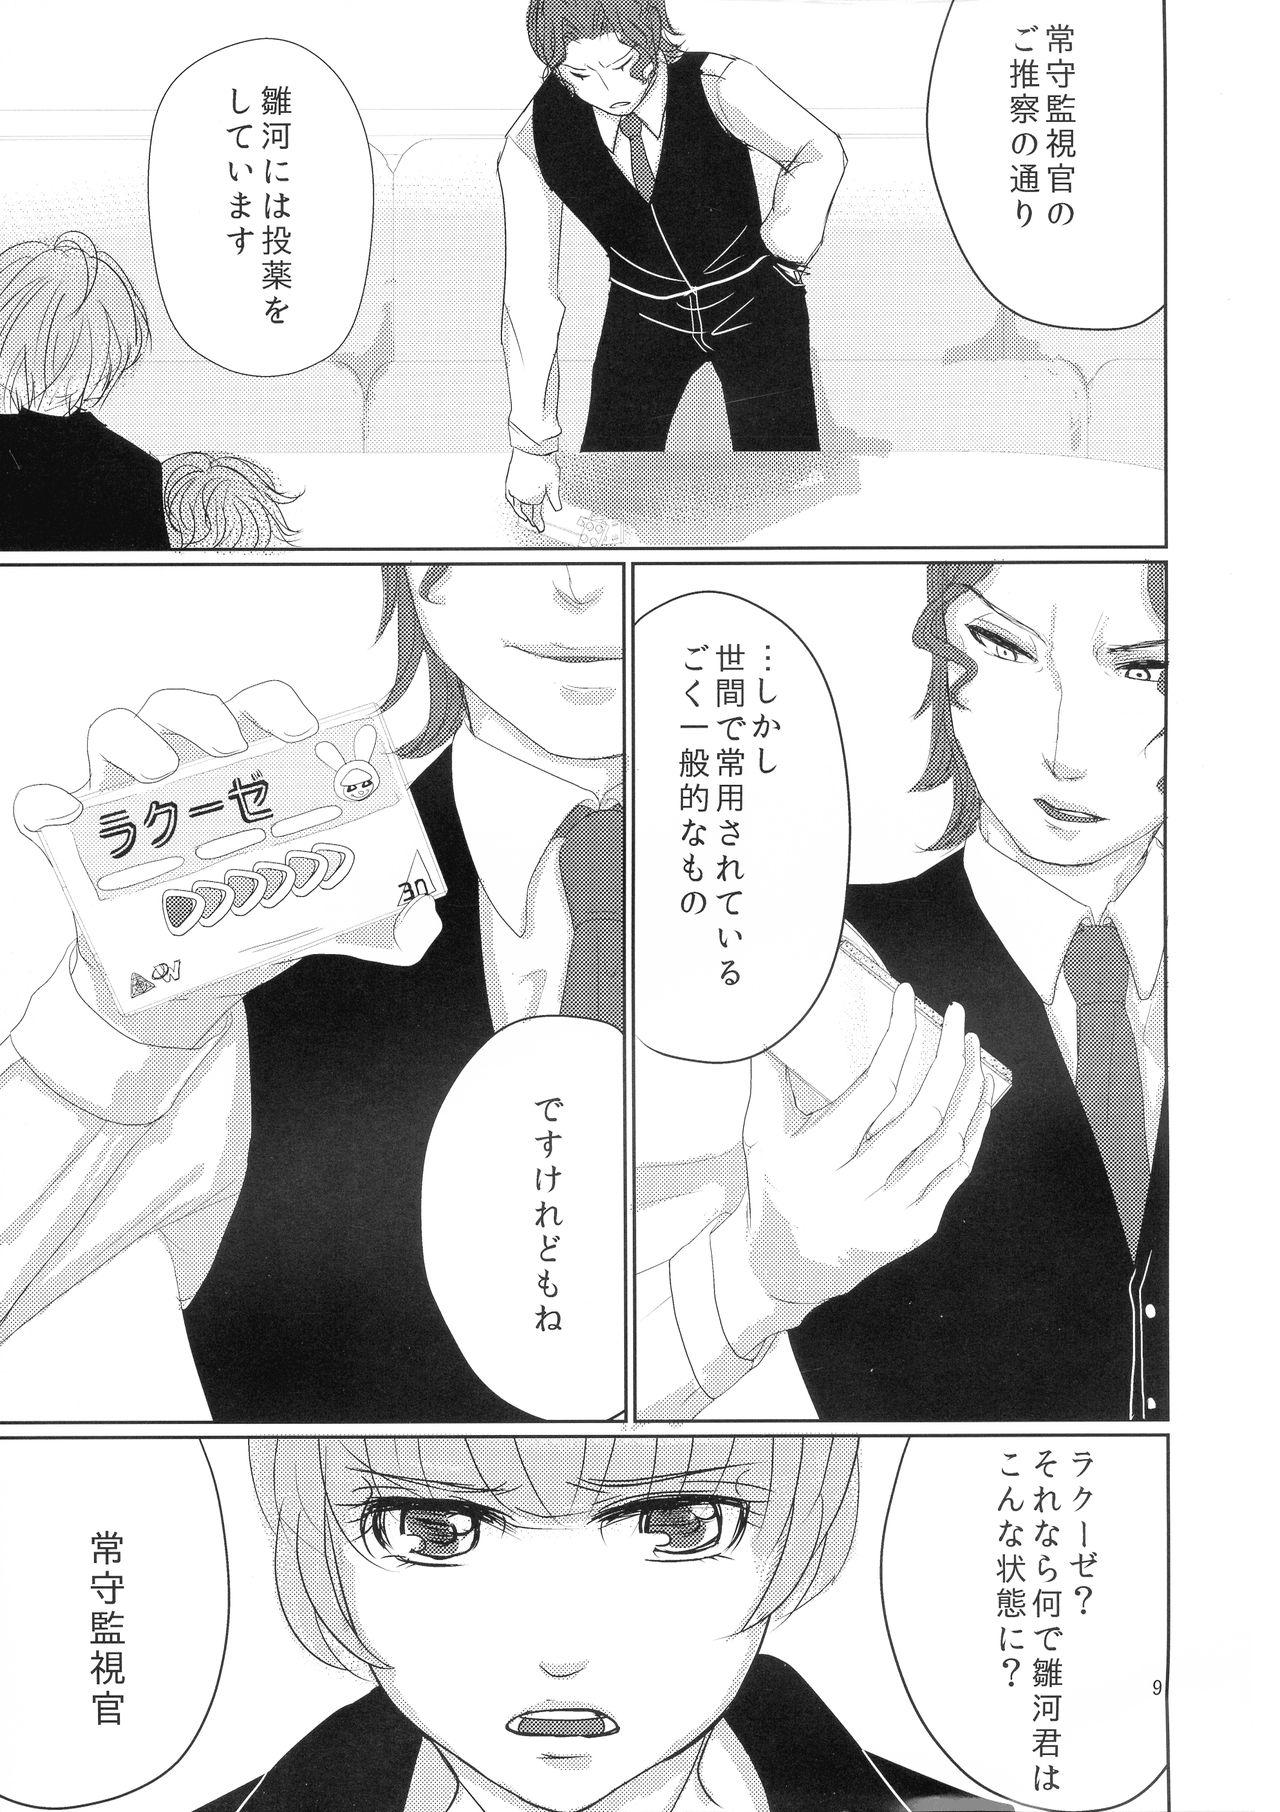 Squirters CSD - Psycho-pass Femboy - Page 9